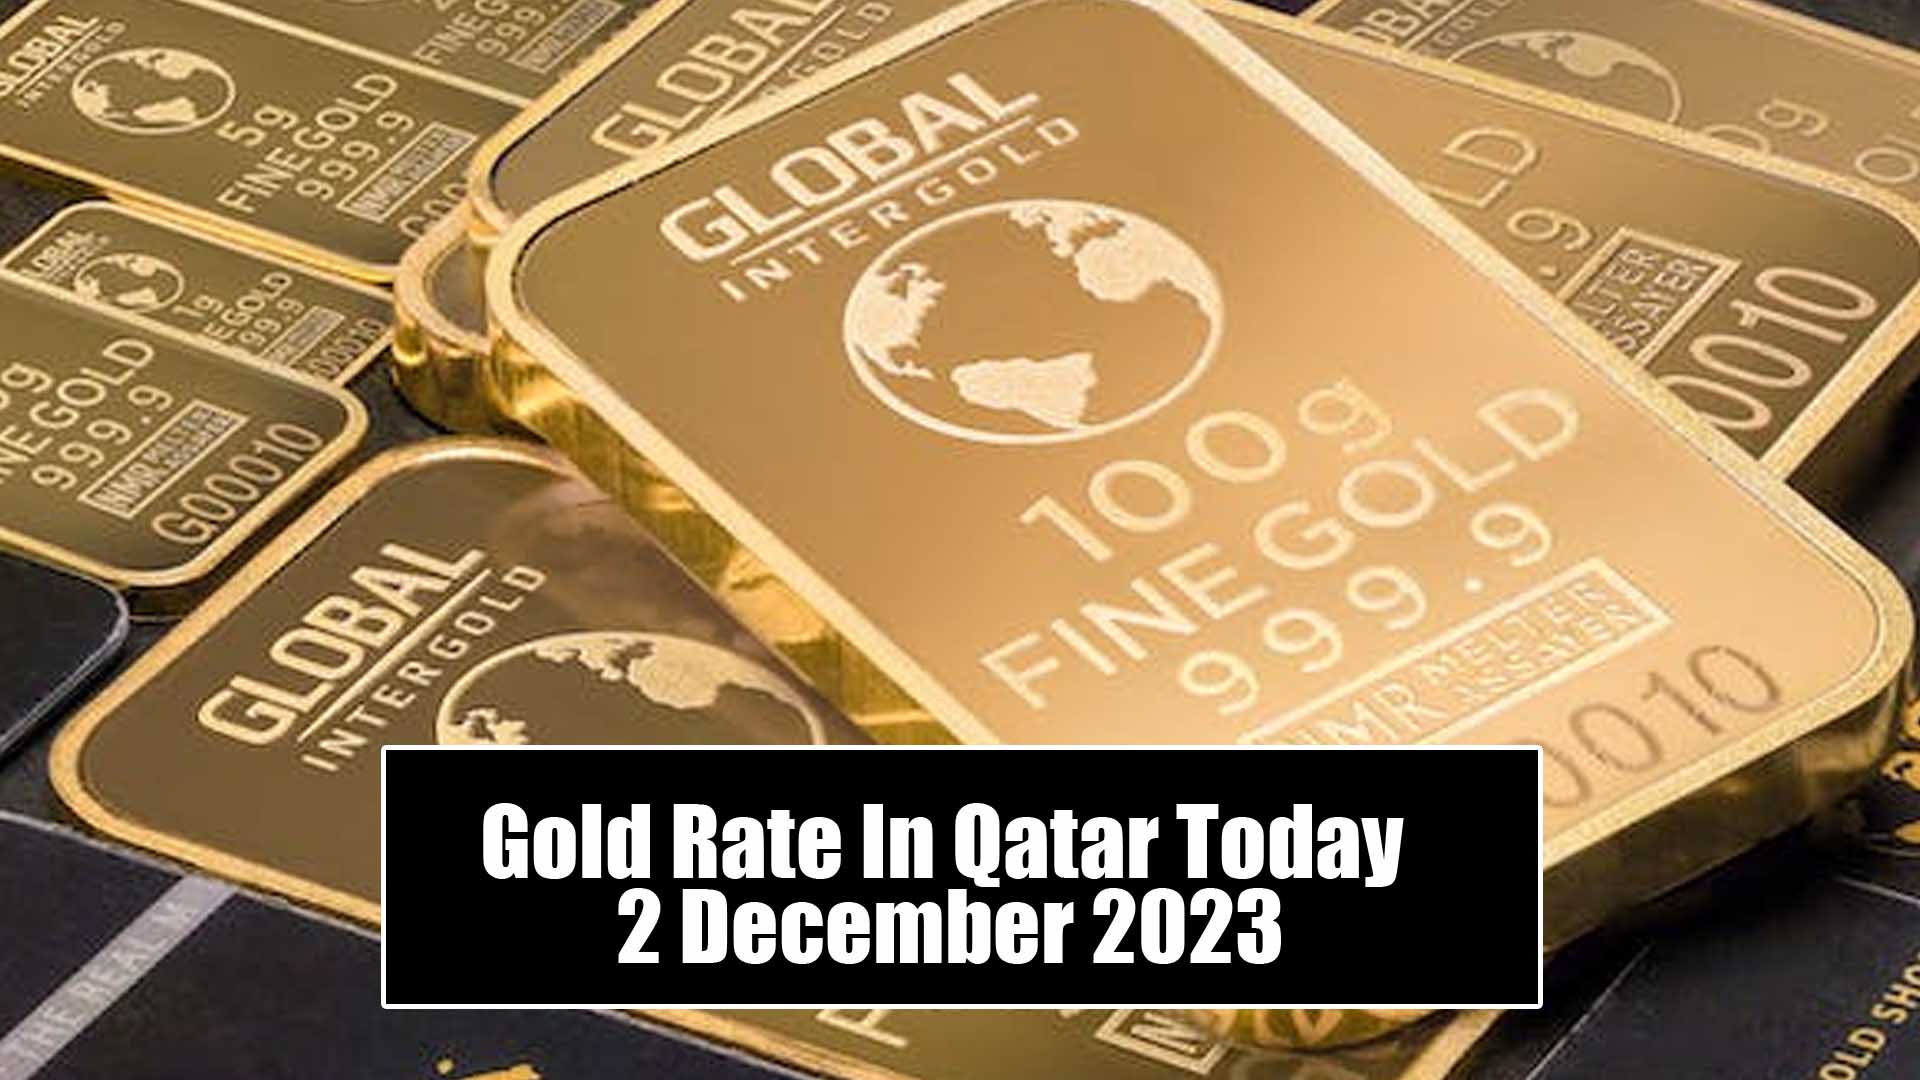 Gold Rate In Qatar Today 2 December 2023